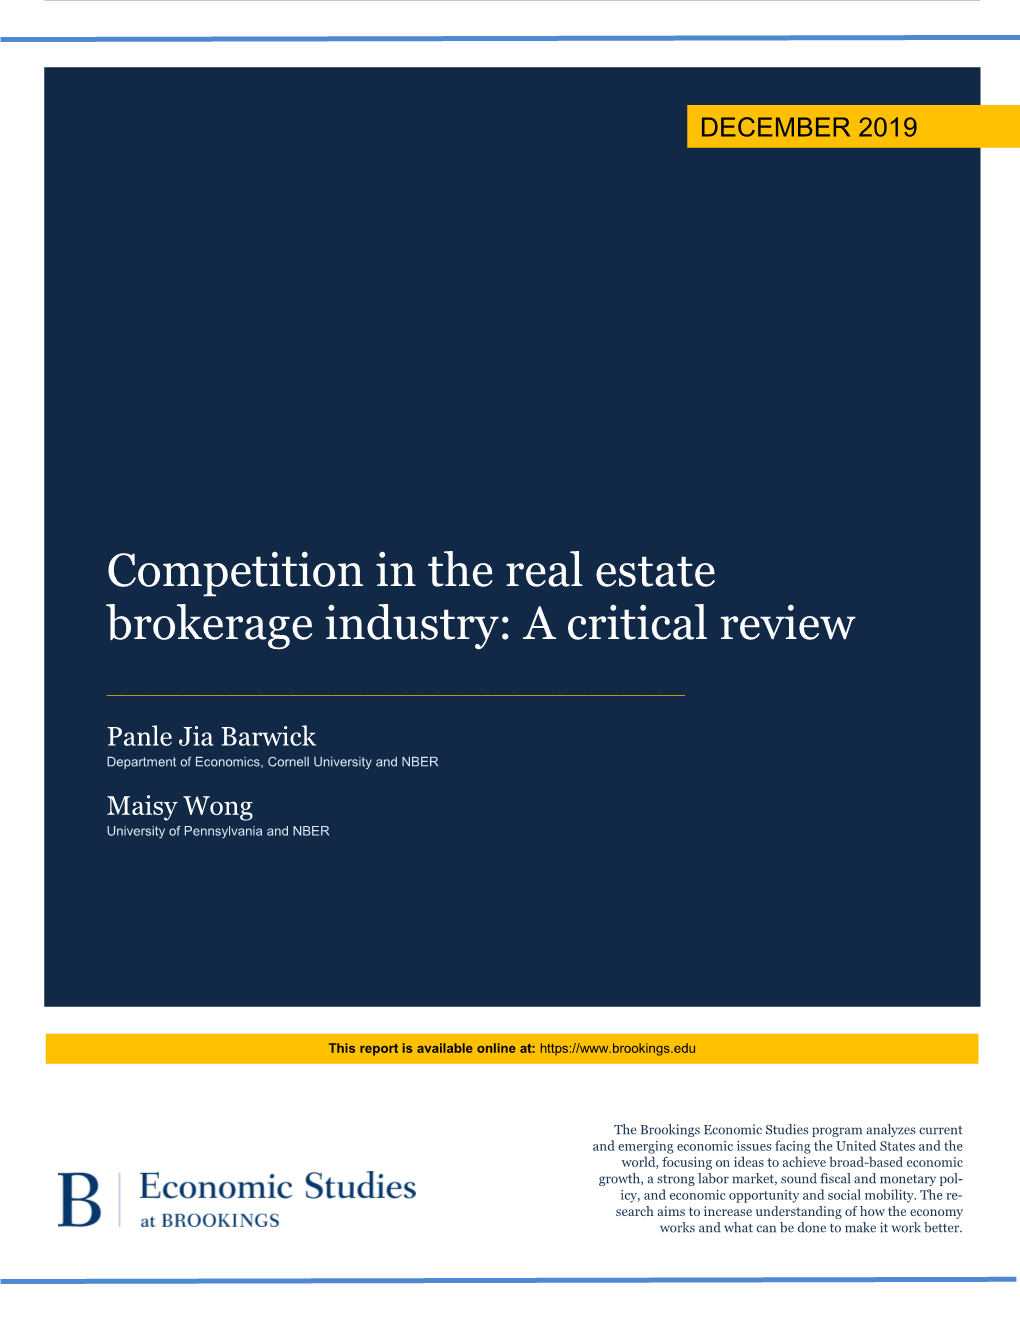 Competition in the Real Estate Brokerage Industry: a Critical Review